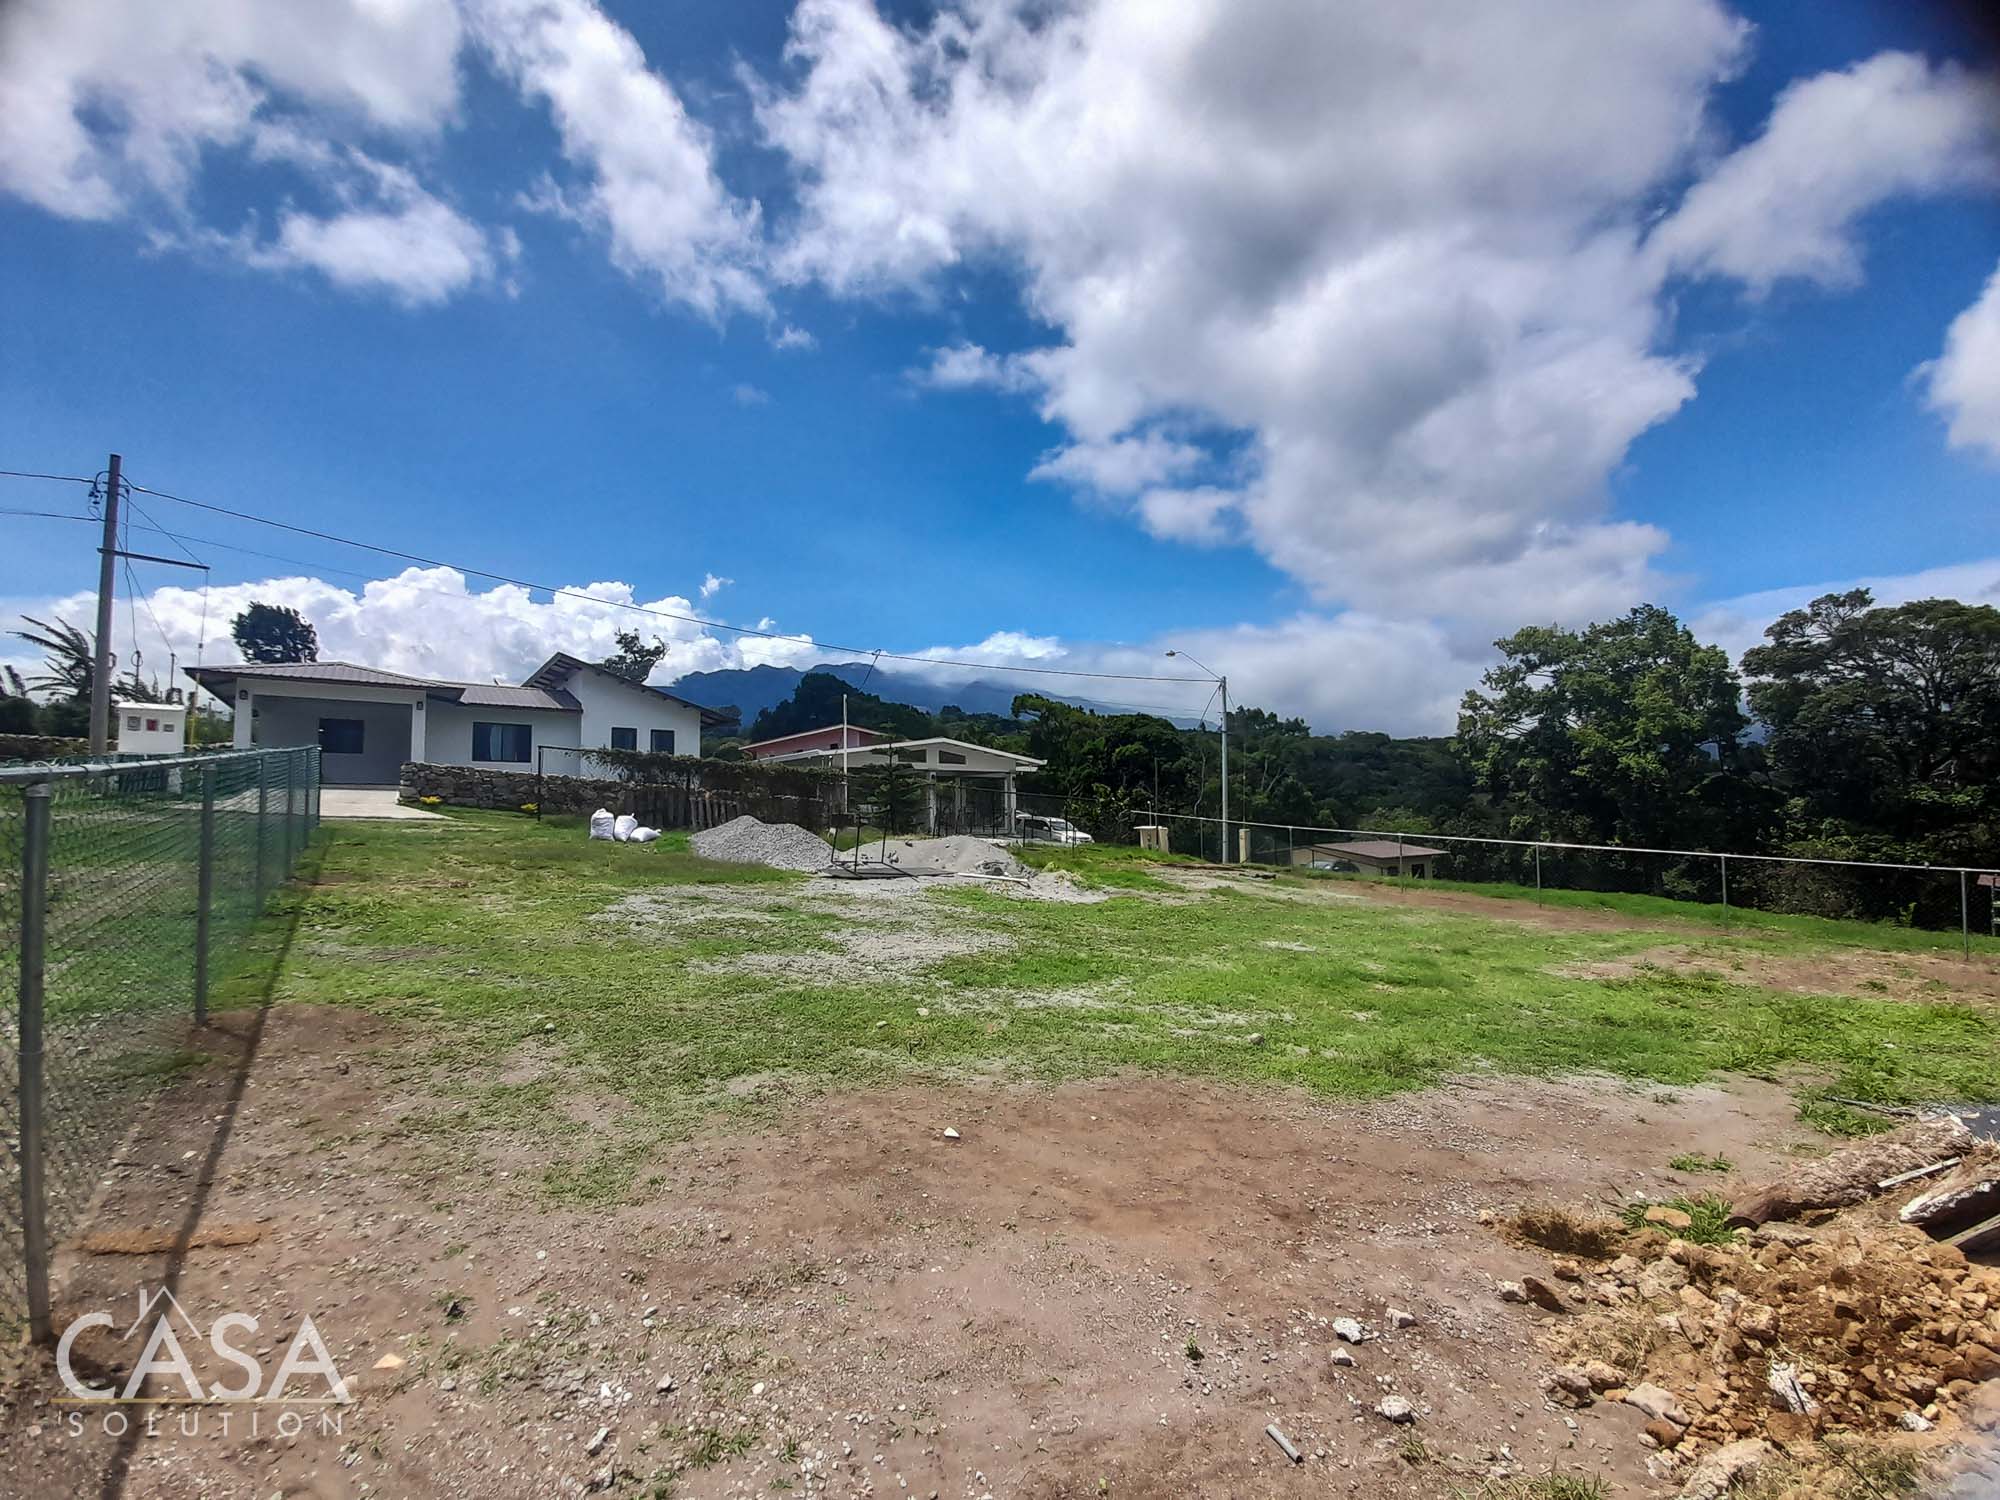 Prime location Lot for Sale with stunning vistas of Volcan Baru and Perfect for your Dream Home in Volcancito, Boquete